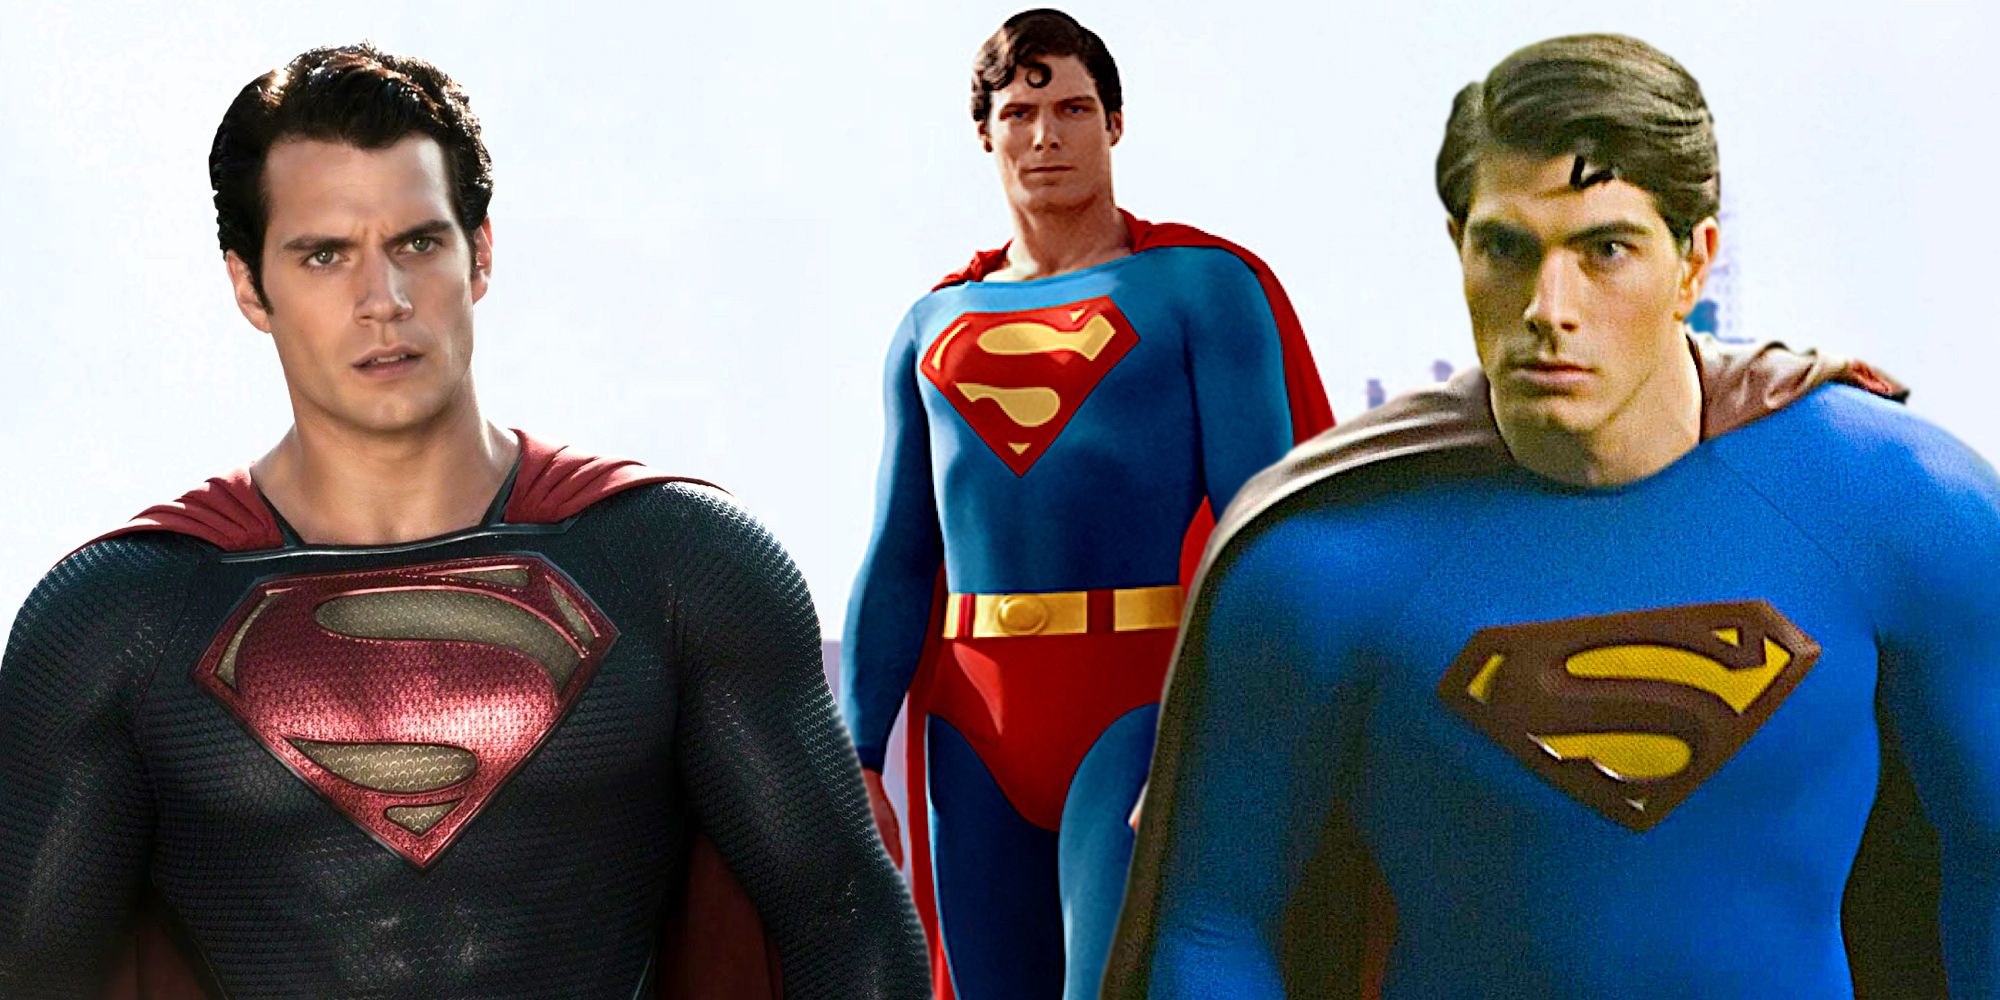 Henry Cavill Brandon Routh and Christopher Reeve as Superman